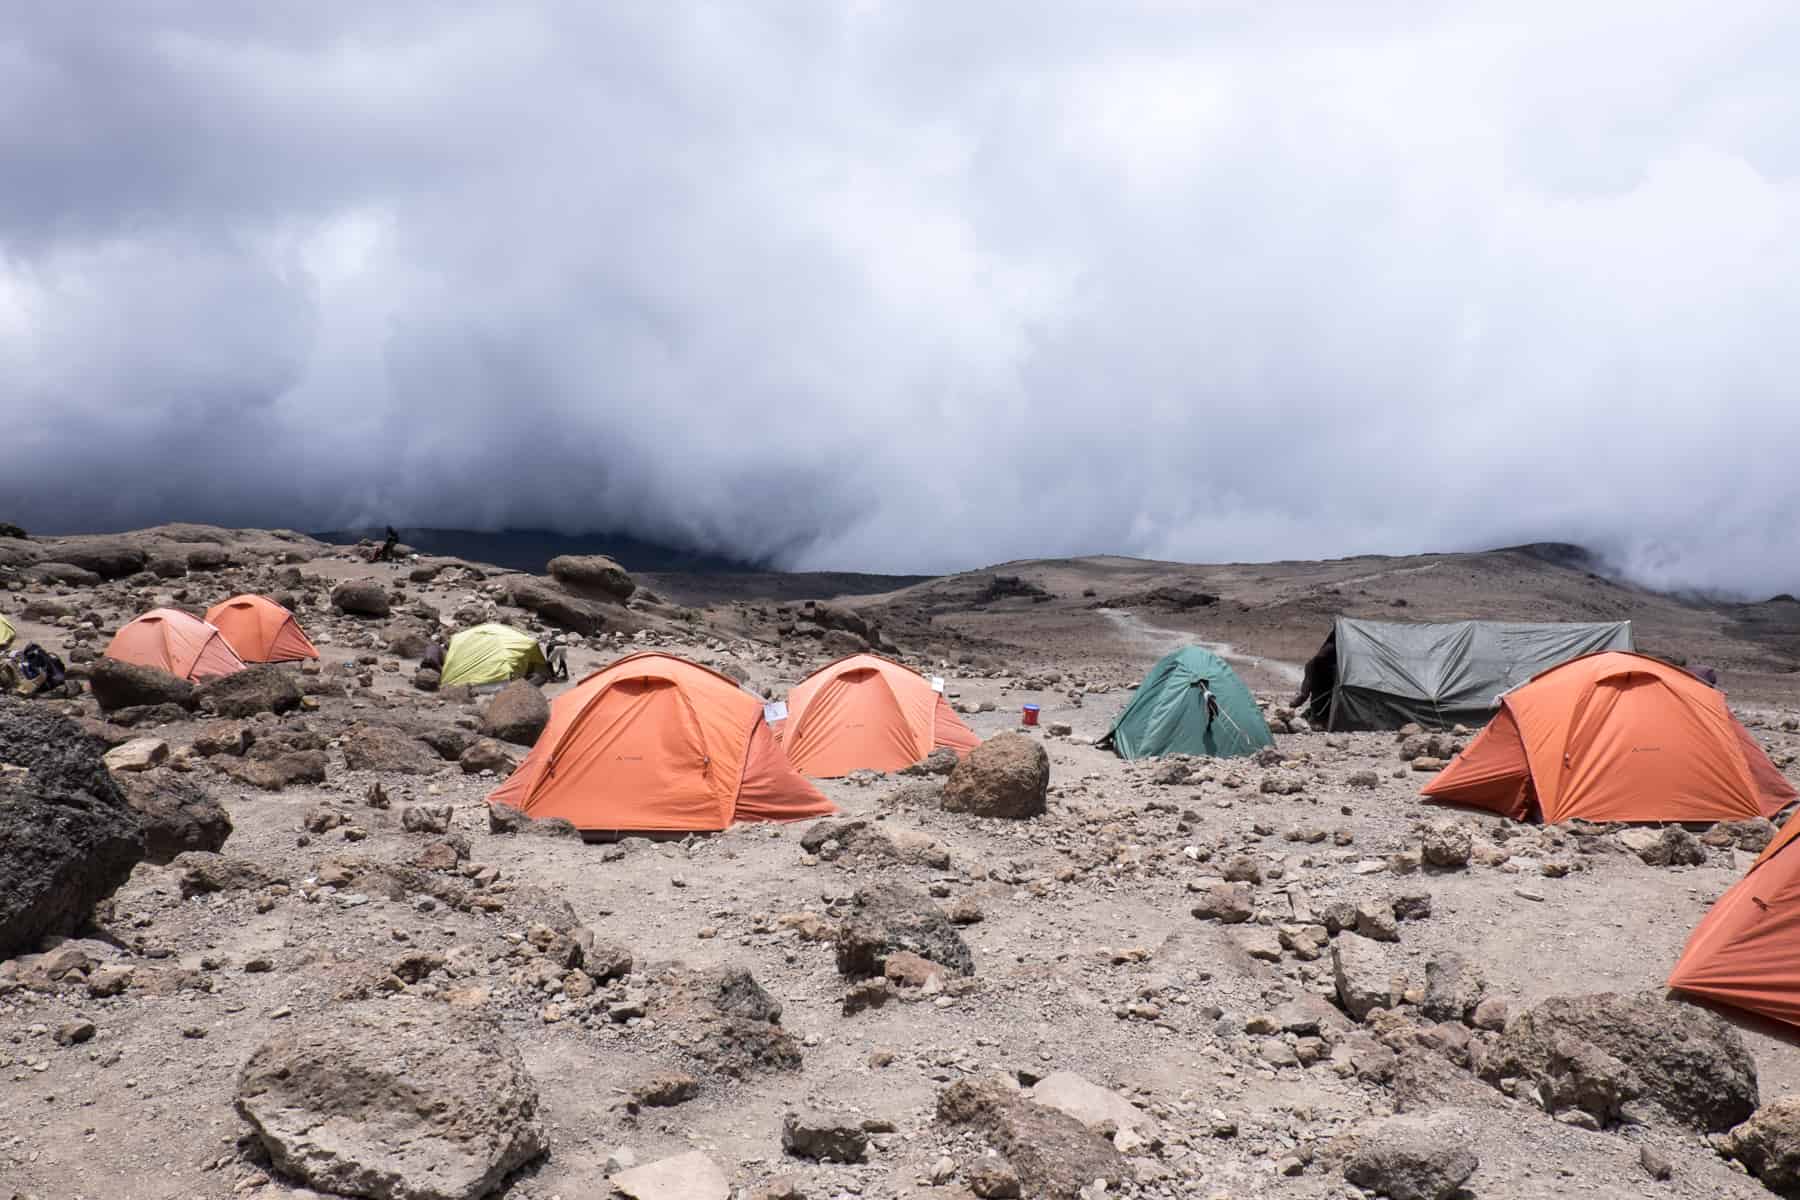 Six orange and three green tents for a small camping ground on the brown, rocky Kilimanjaro Base Camp.